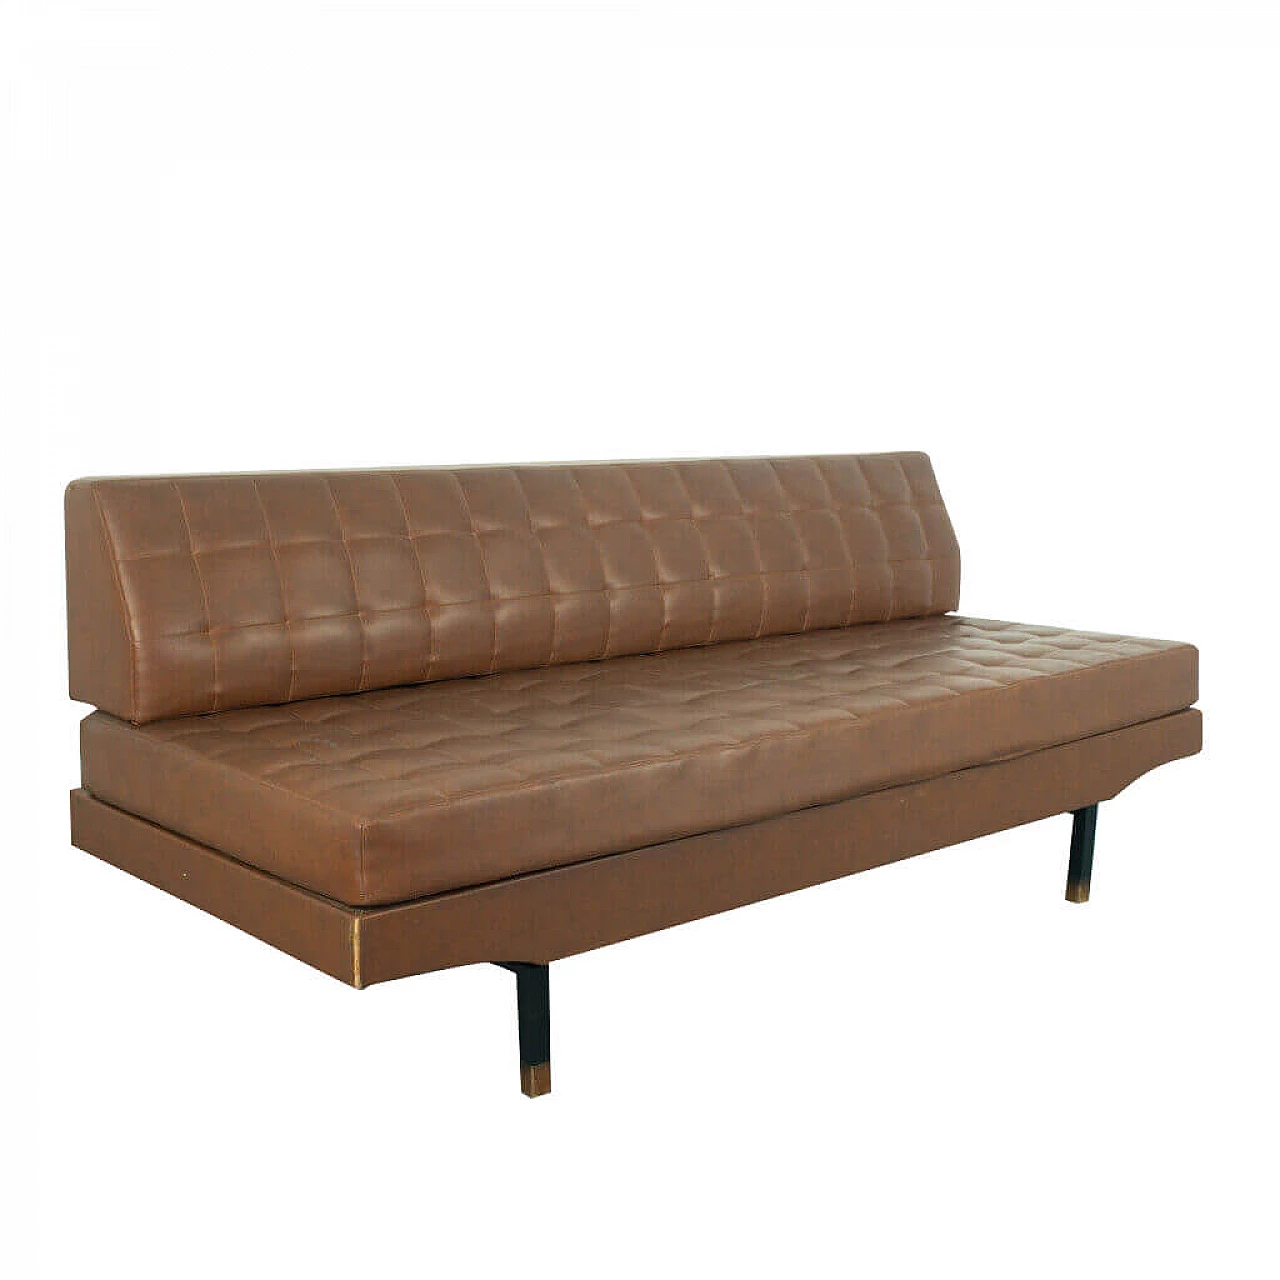 3-Seater sofa or daybed by Marco Zanuso for Flexform, 1950s 1184768